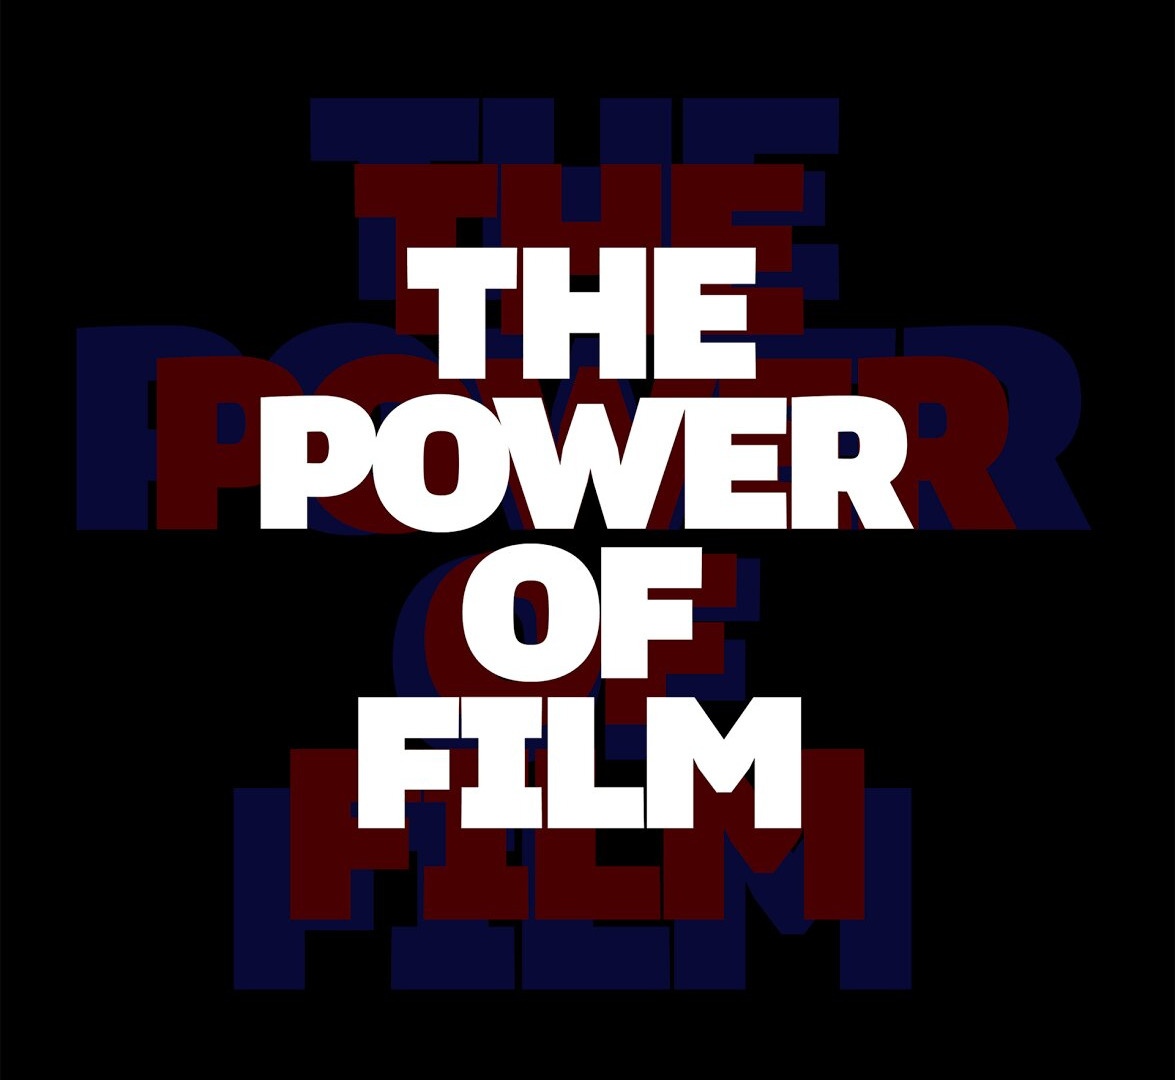 Show The Power of Film